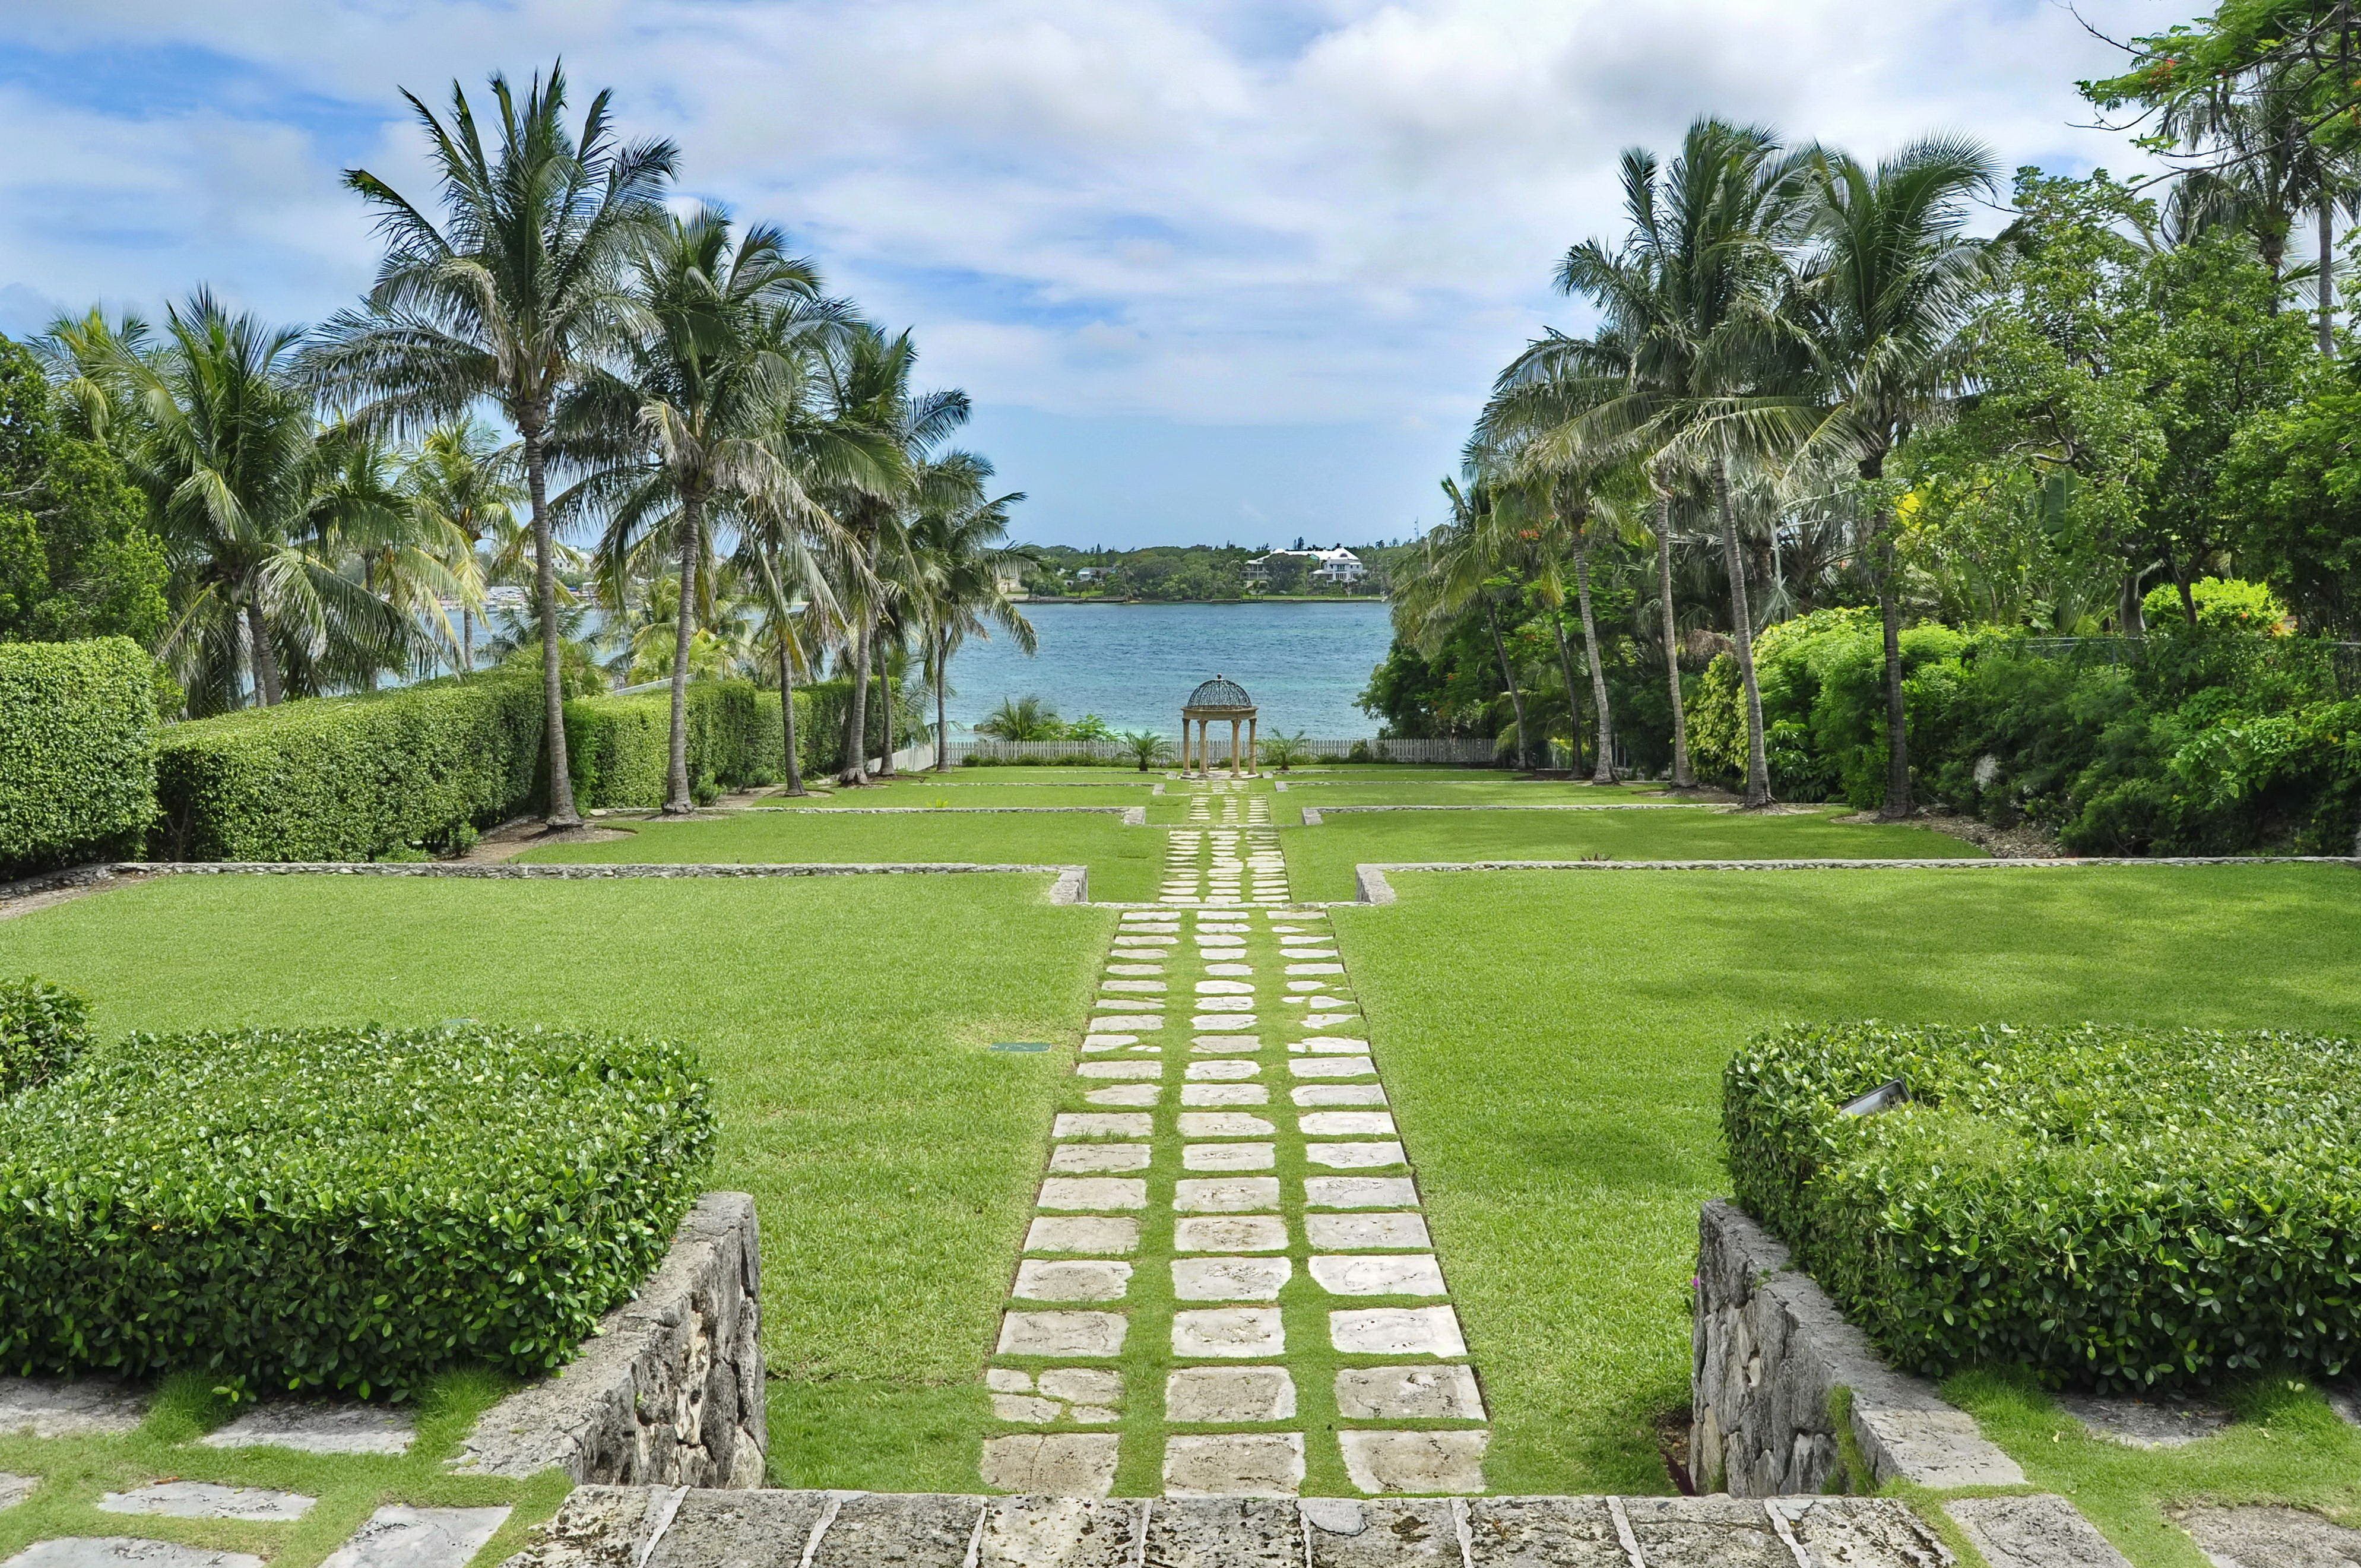 The lush Versailles-style Gardens in Nassau, Bahamas near the water